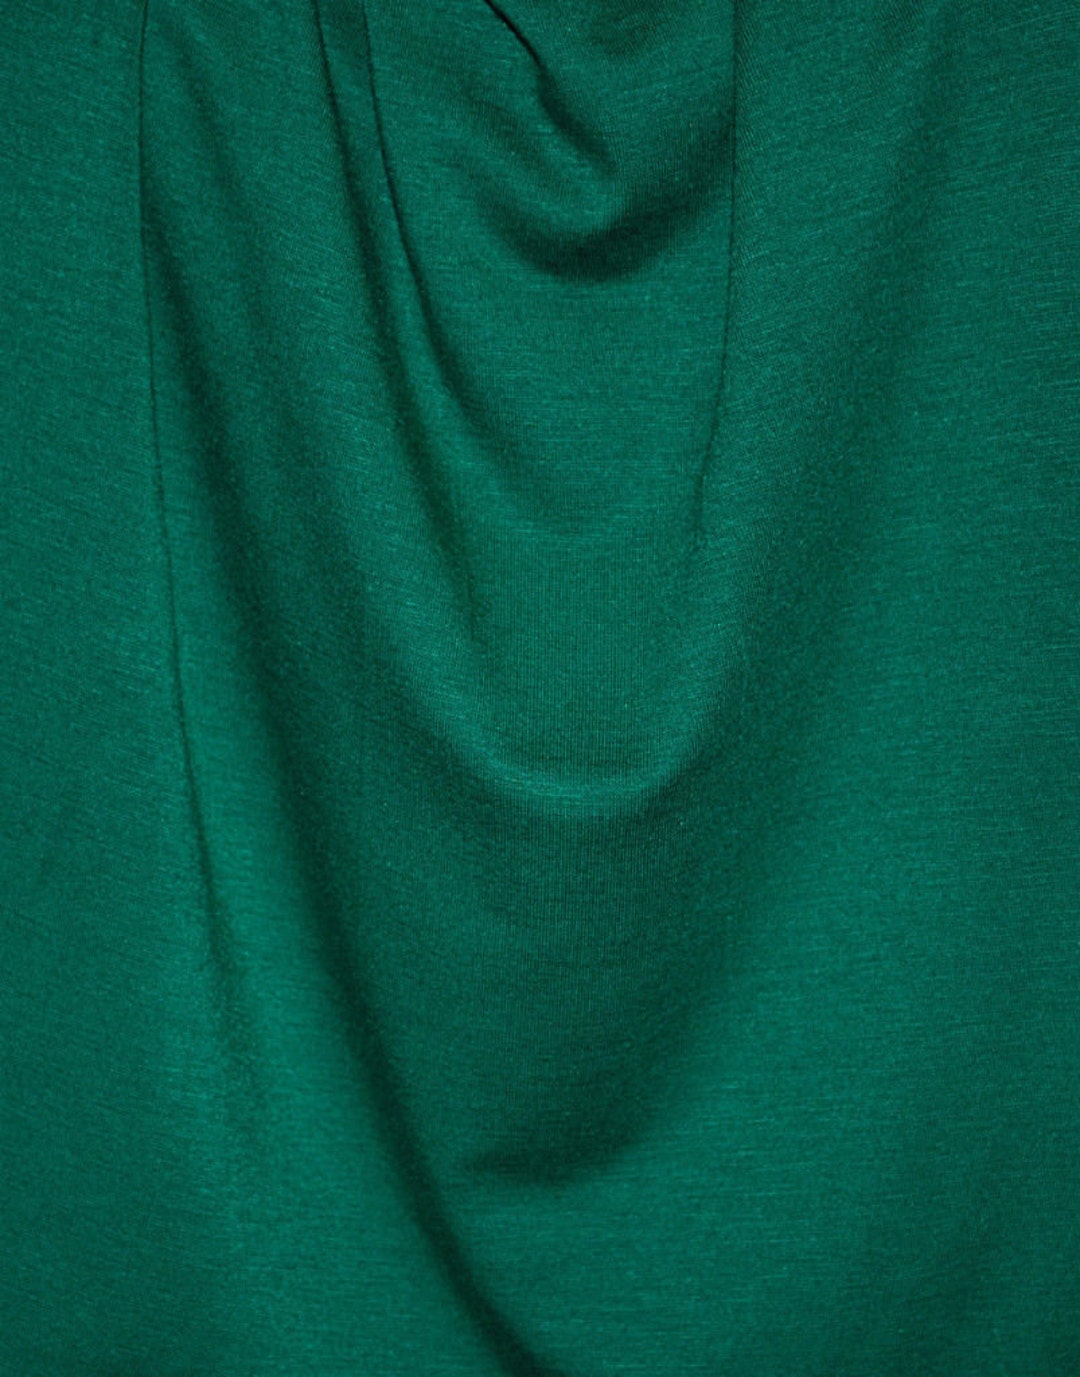 Micro Modal Spandex Fabric Jersey Knit by the Yard EMERALD GREEN -   Canada